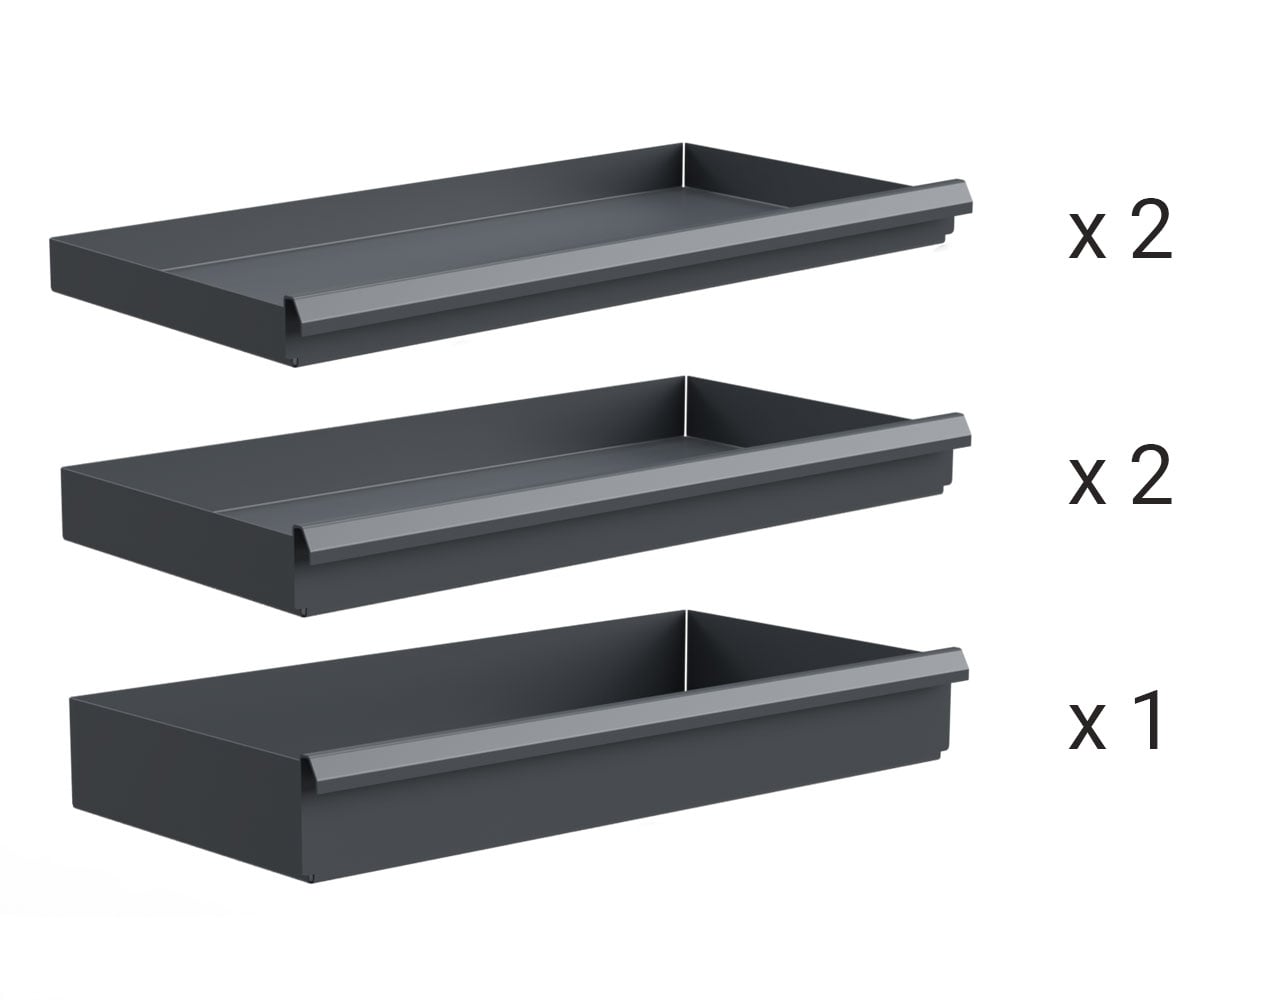 Extra Heavy Duty Drawer Kit with (2) 3in. (2) 4 in. (1) 6 in. Drawers for 48 in. W x 24 in. D Cabinet